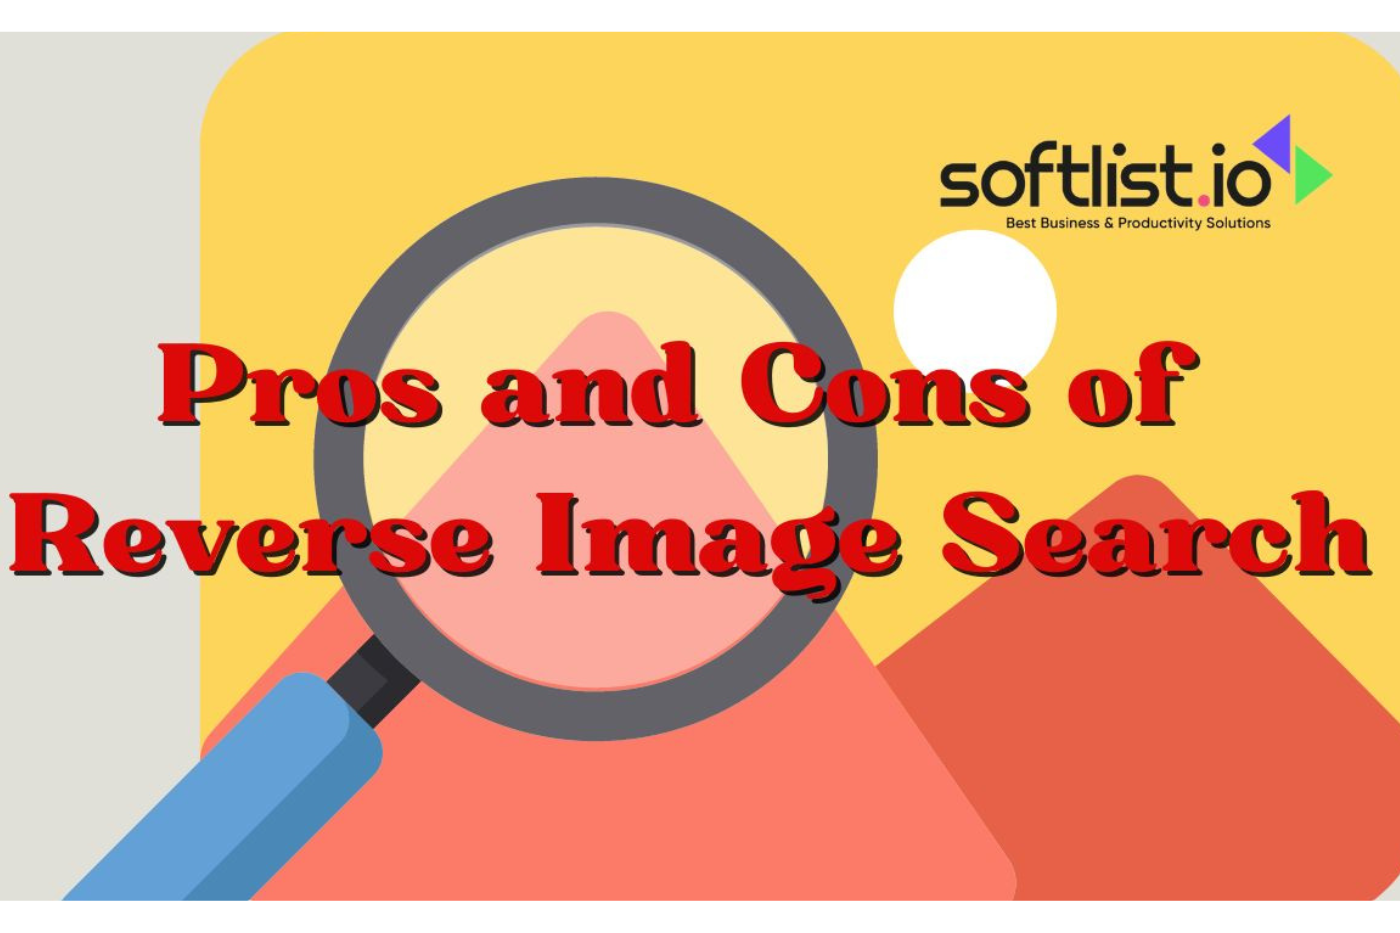 Pros and Cons of Reverse Image Search